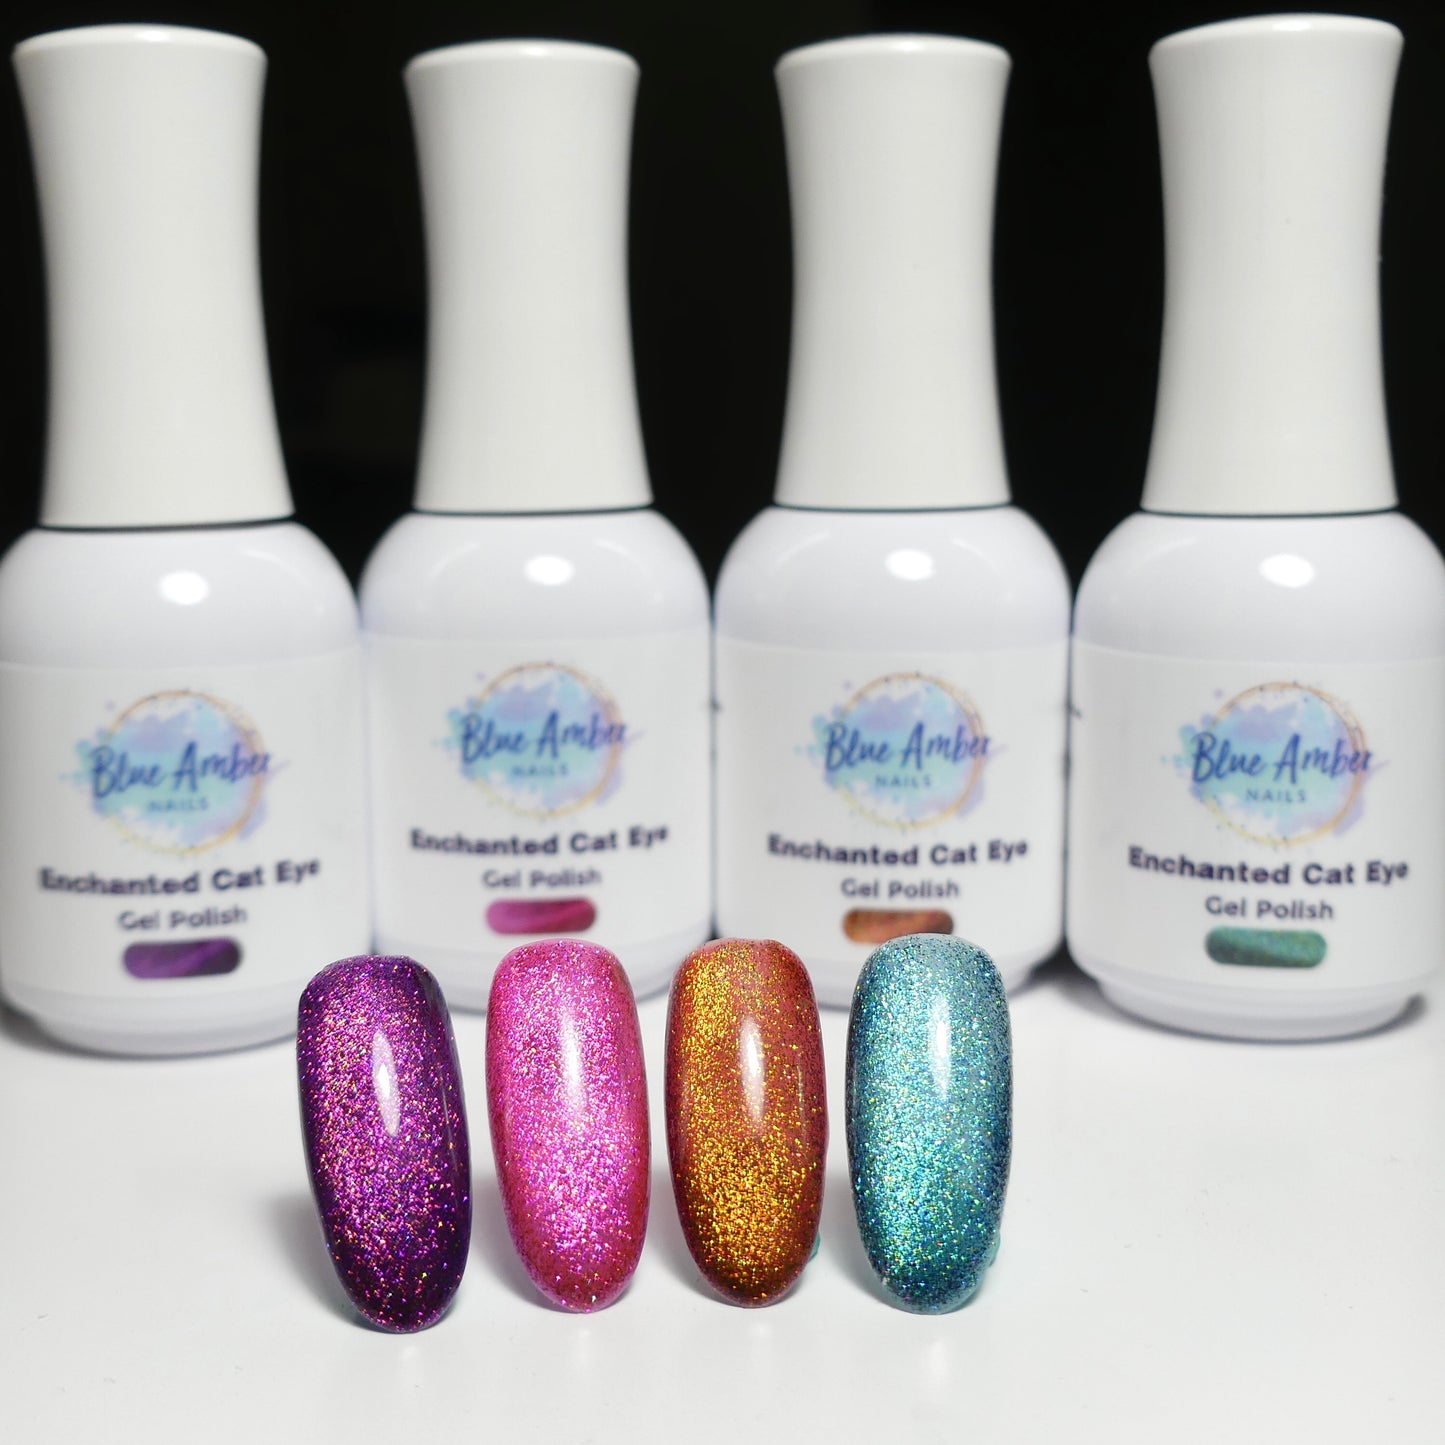 Load image into Gallery viewer, Enchanted Cat Eye Bundle - 4 Magnetic Gel Polishes
